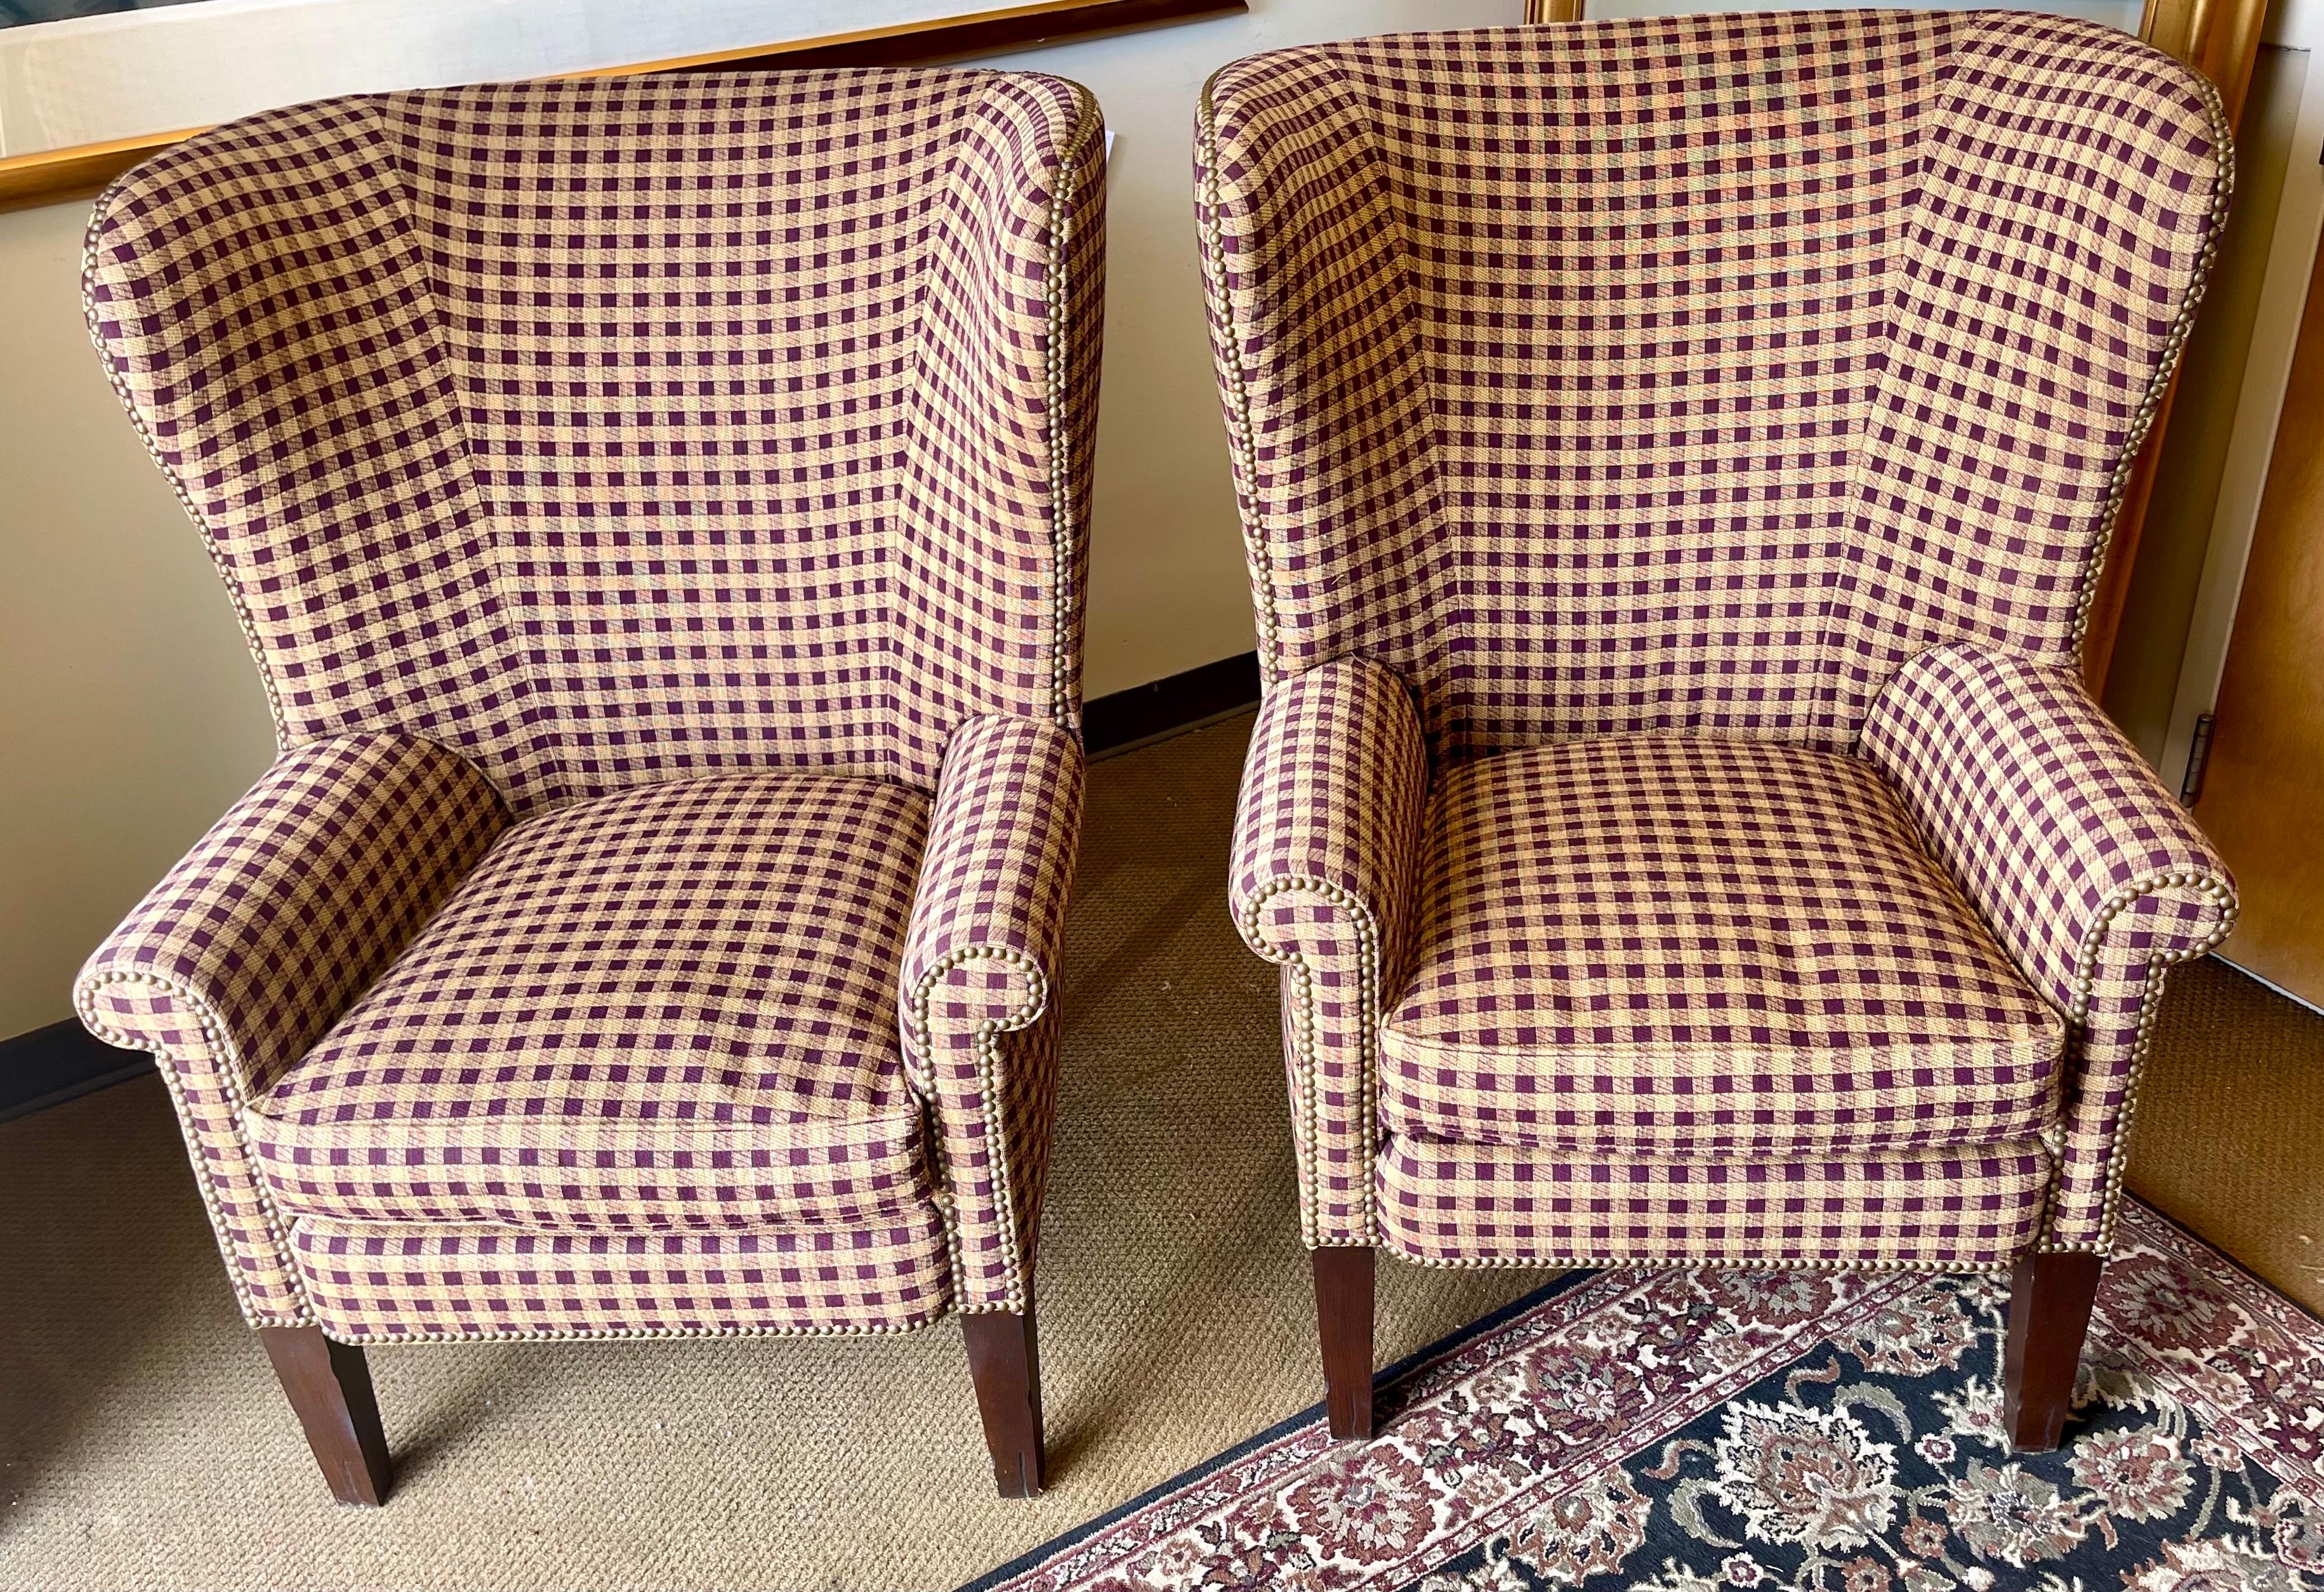 Stunning pair of matching monumental Ralph Lauren for Henredon wingback nailhead chairs. These are grand reading chairs. Gorgeous two tone color scheme - see pics for details. Why not own the best?.